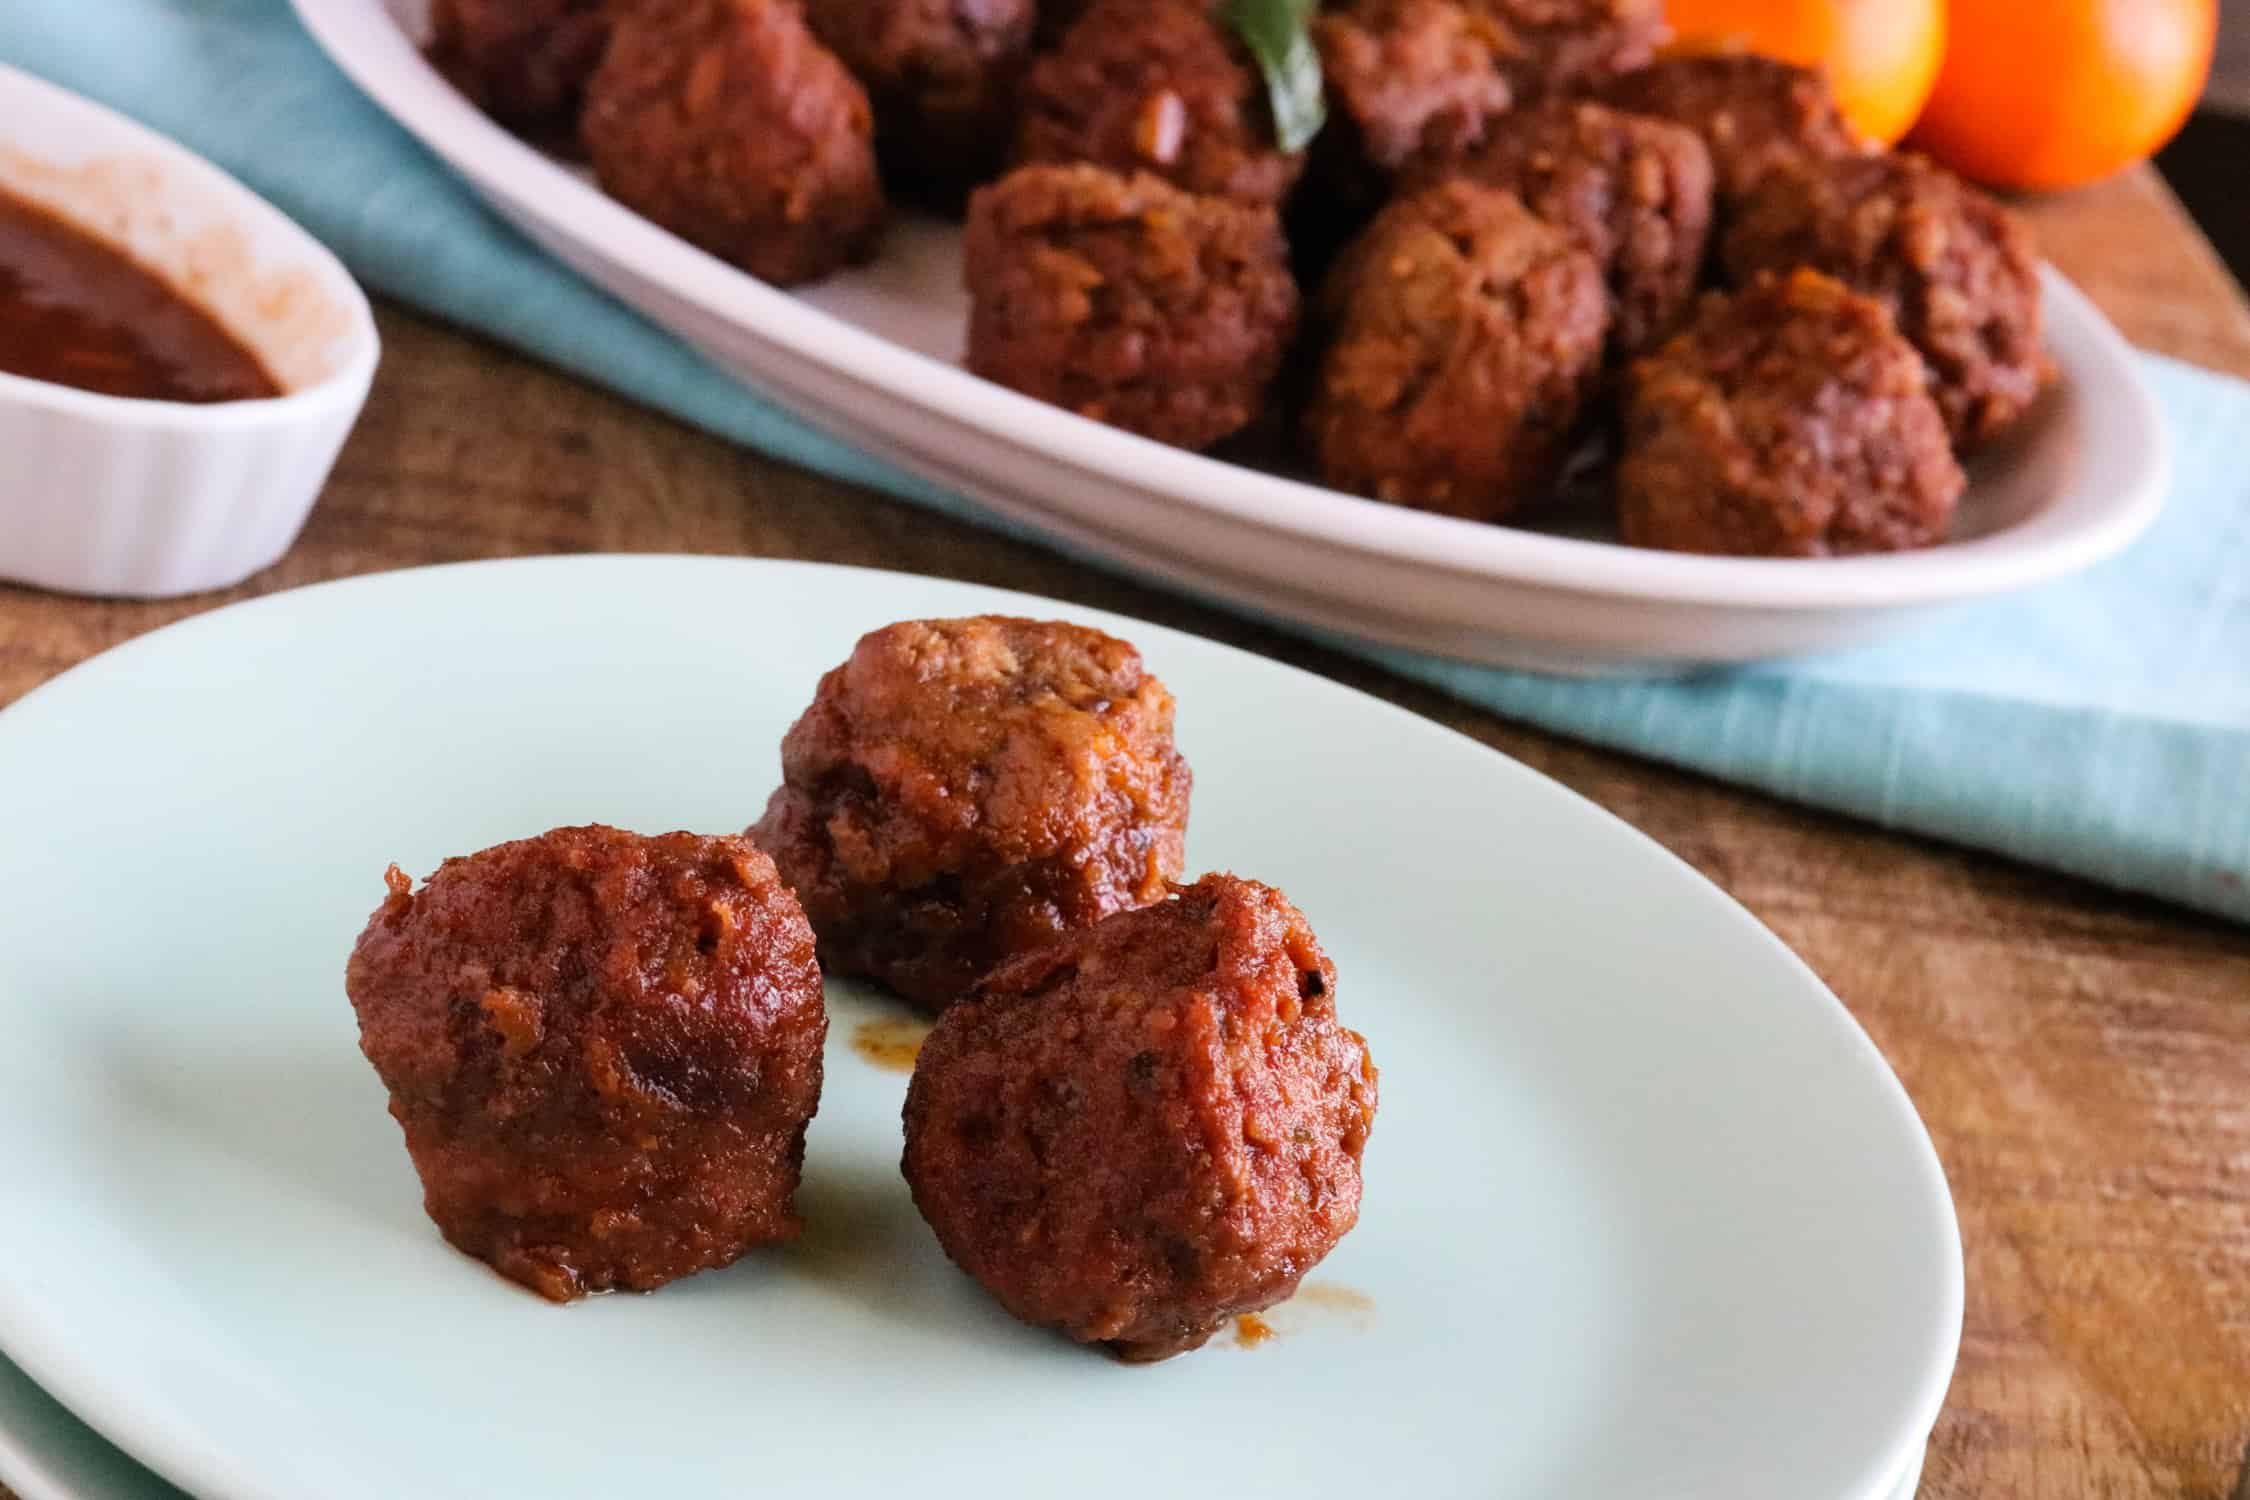 Three meatballs from the Instant Pot Orange BBQ Meatballs Recipe served on a light blue plate